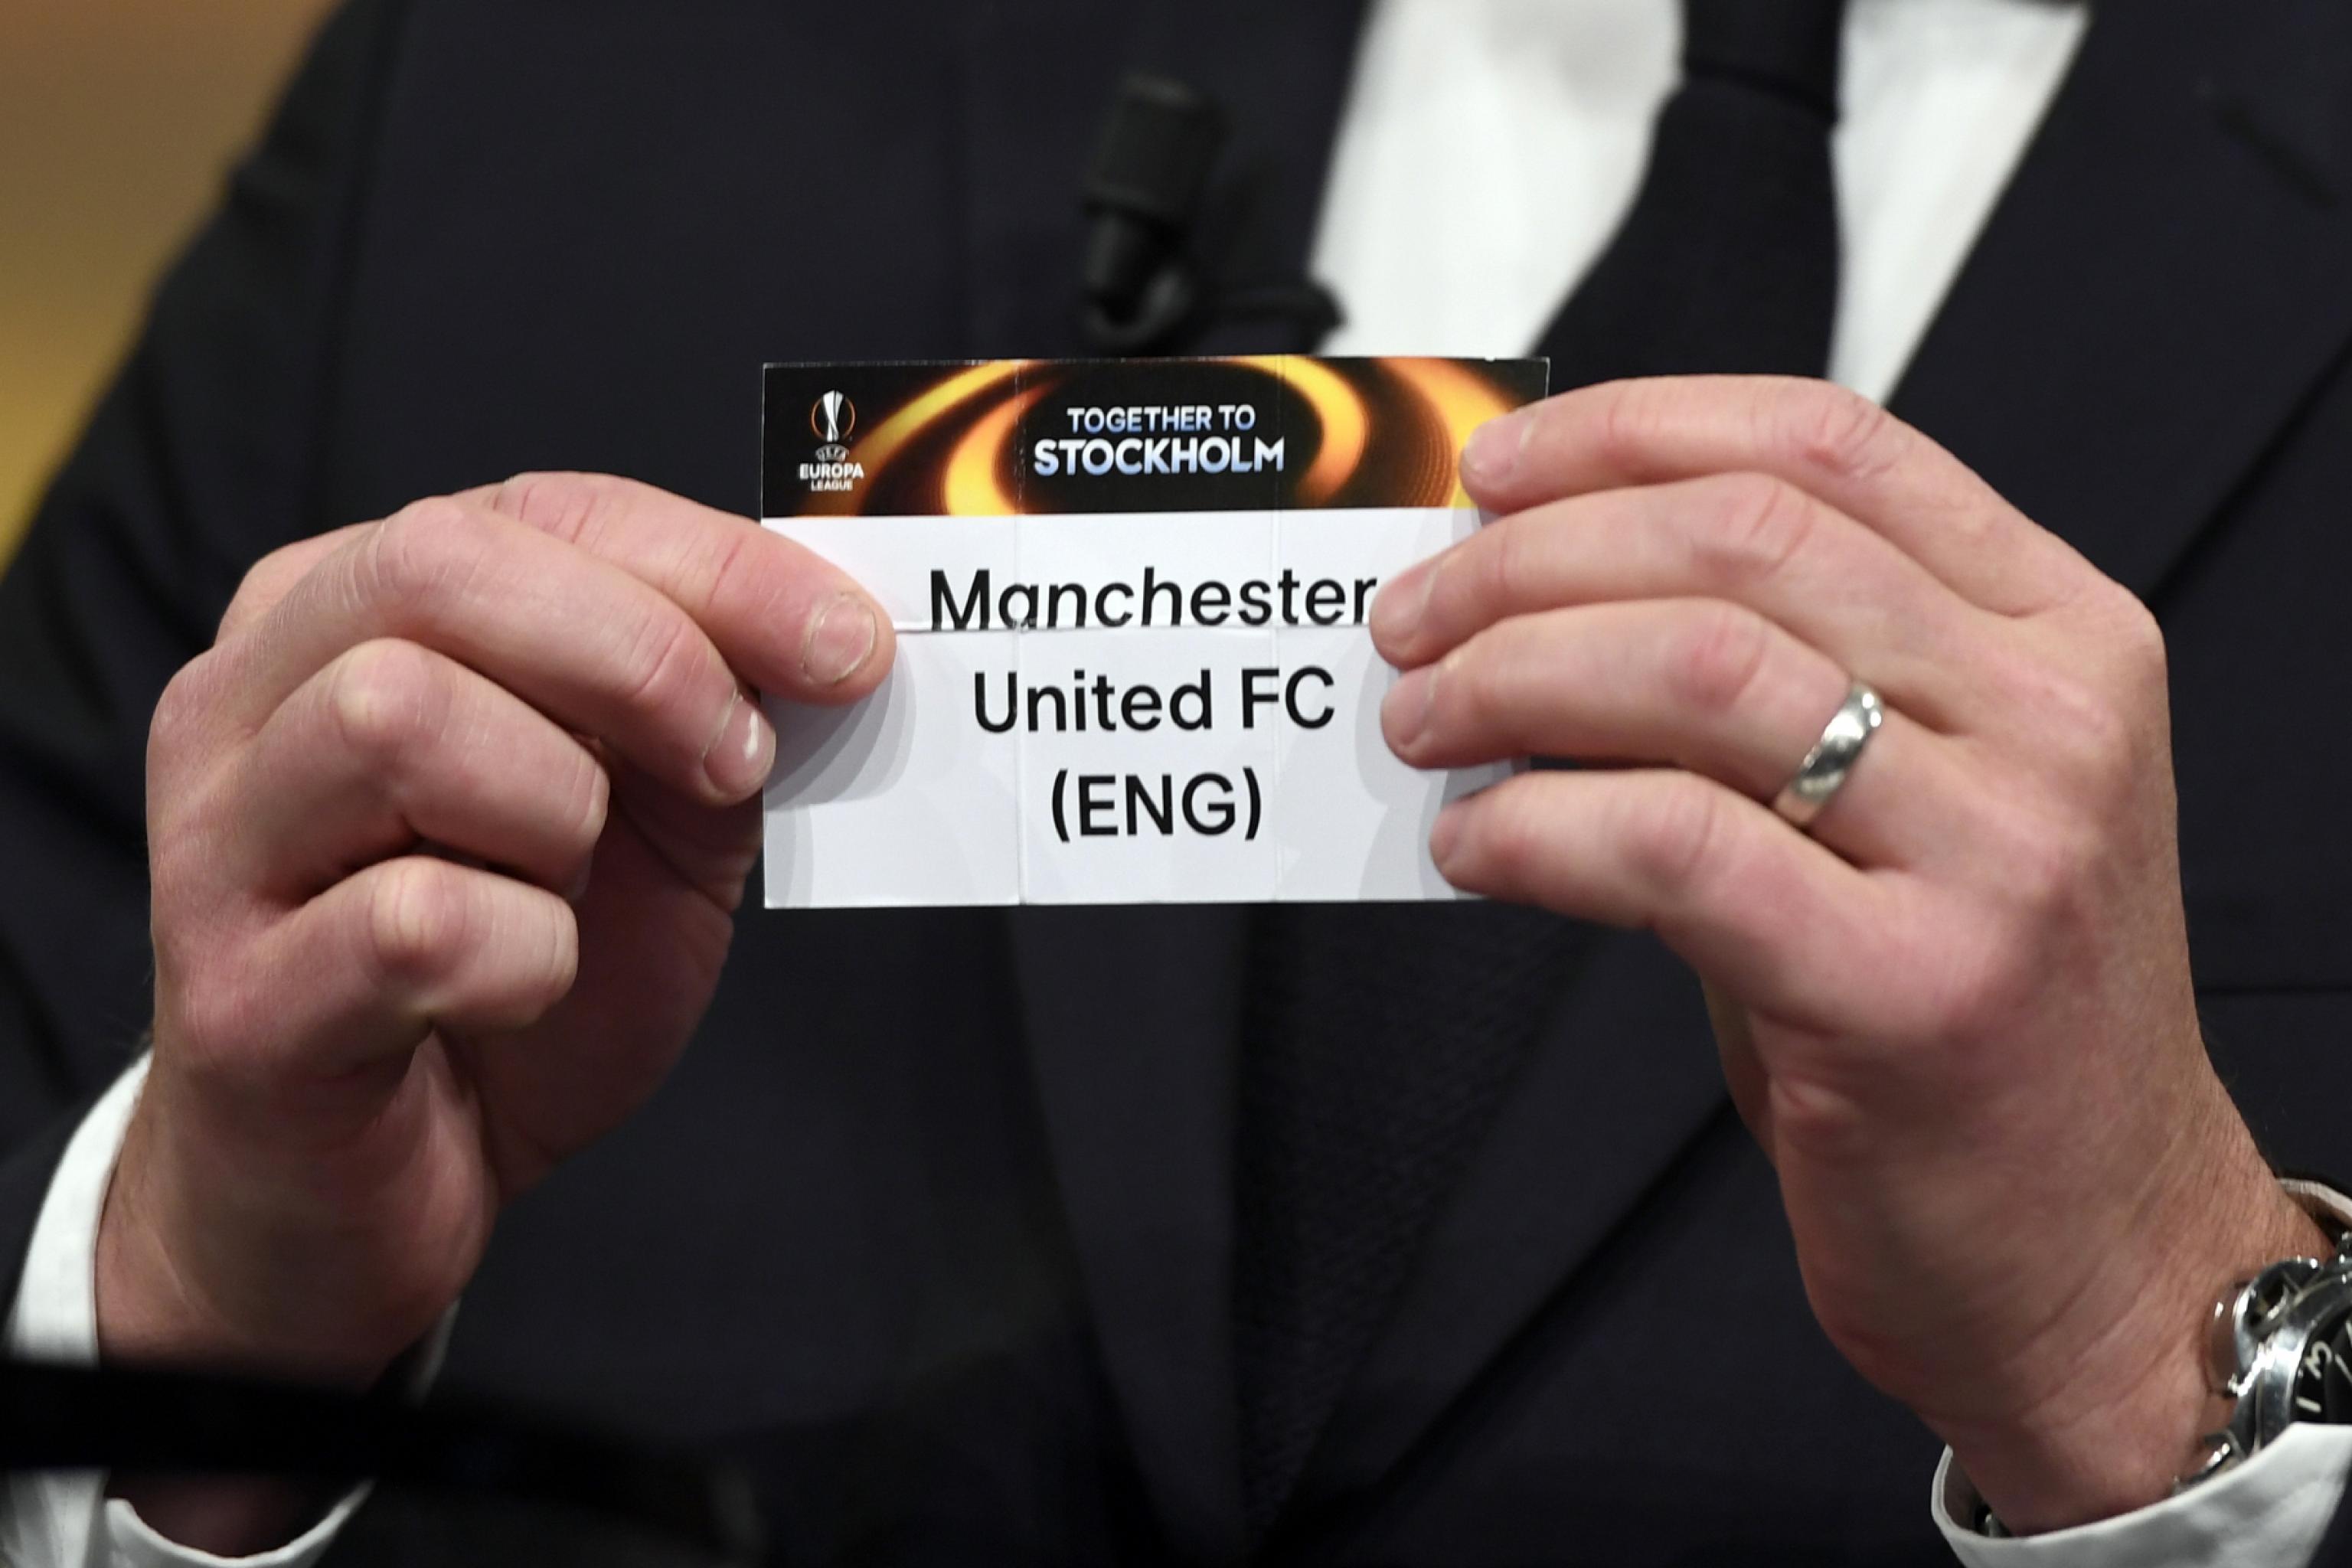 Europa League Draw 2020 Schedule Of Dates For Round Of 16 Fixtures Bleacher Report Latest News Videos And Highlights